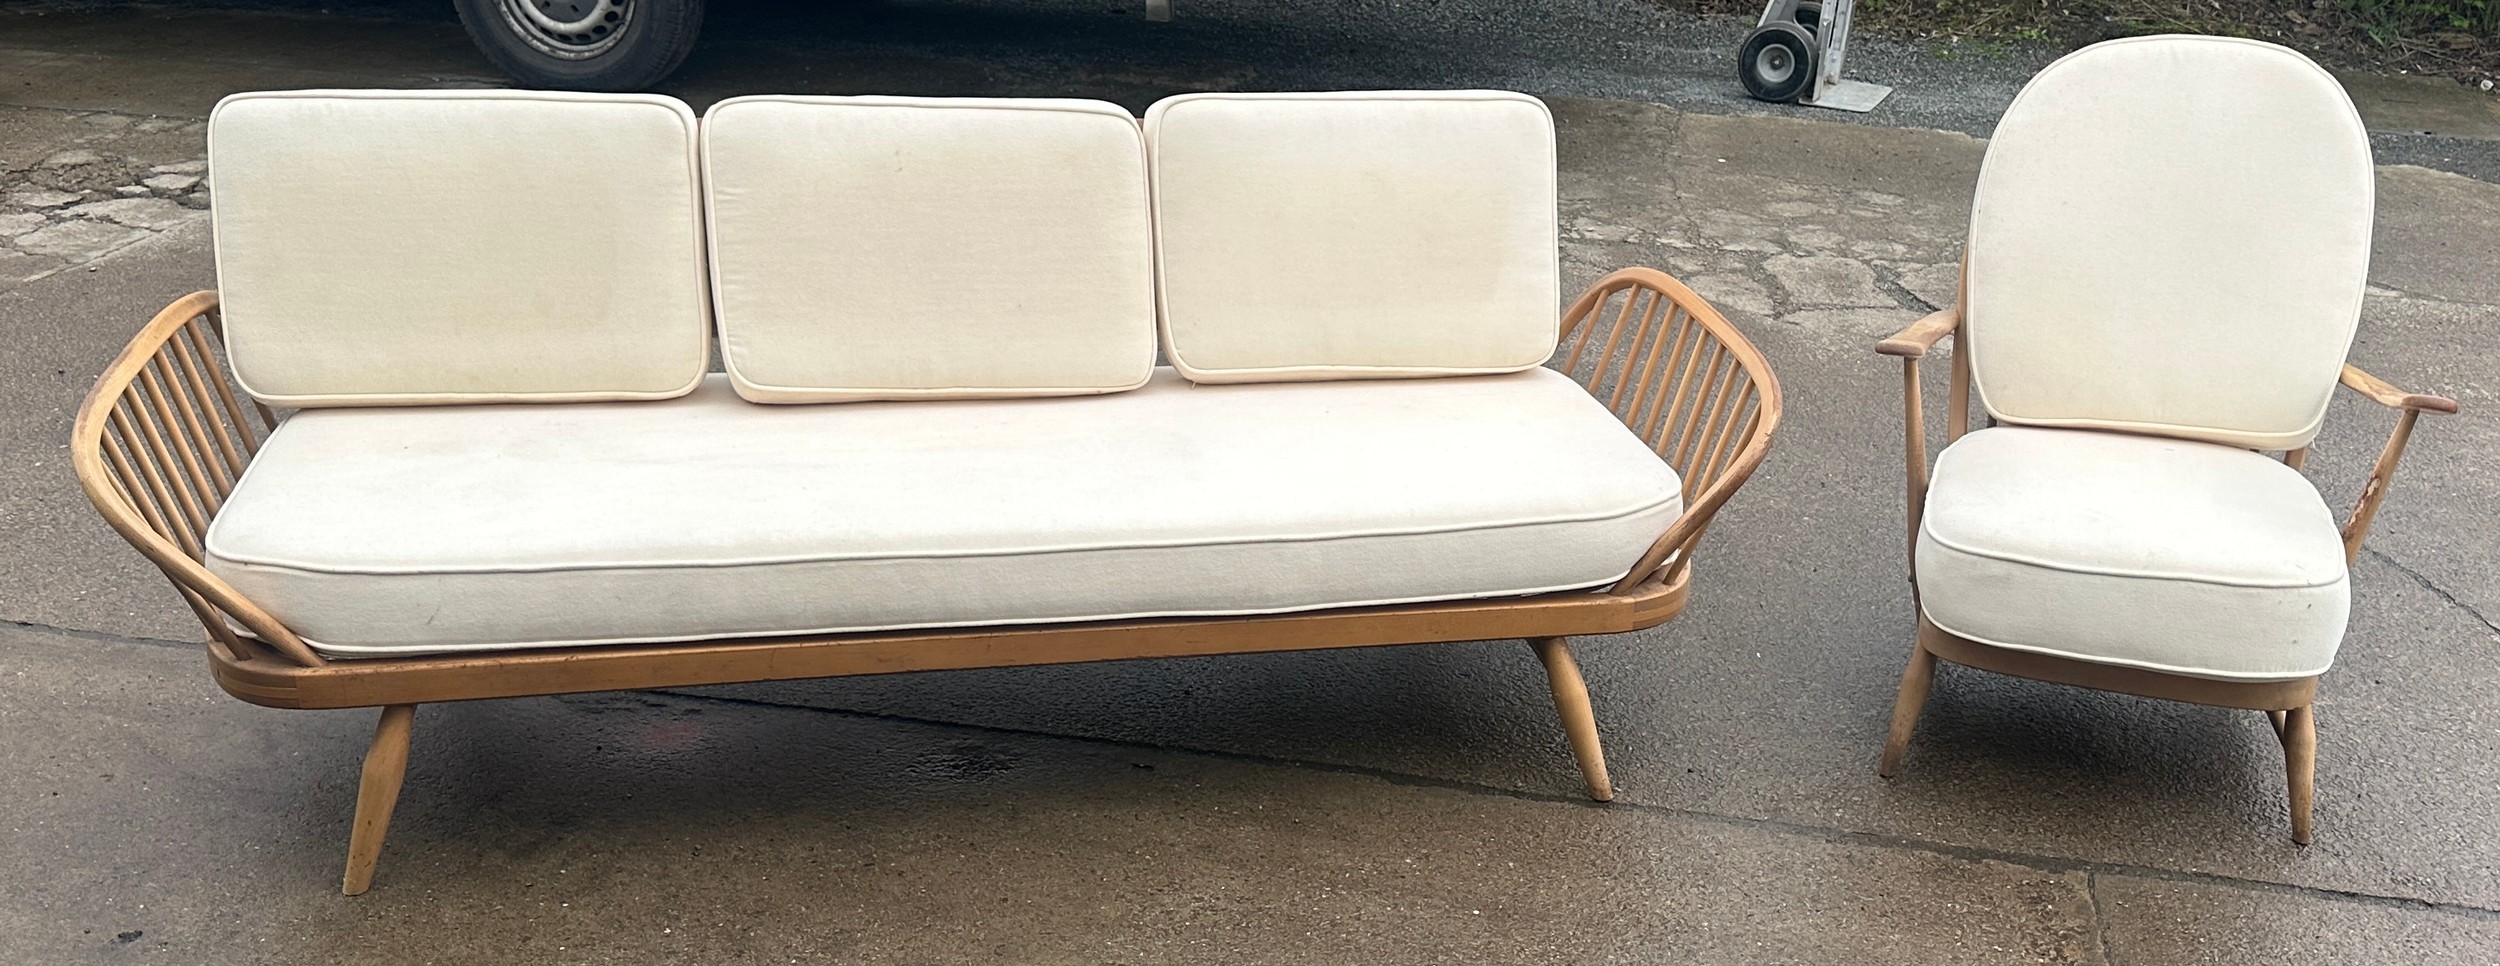 Ercol sofa and chair with cushions, approximate measurements: 82 inches width x 32 inches depth x 29